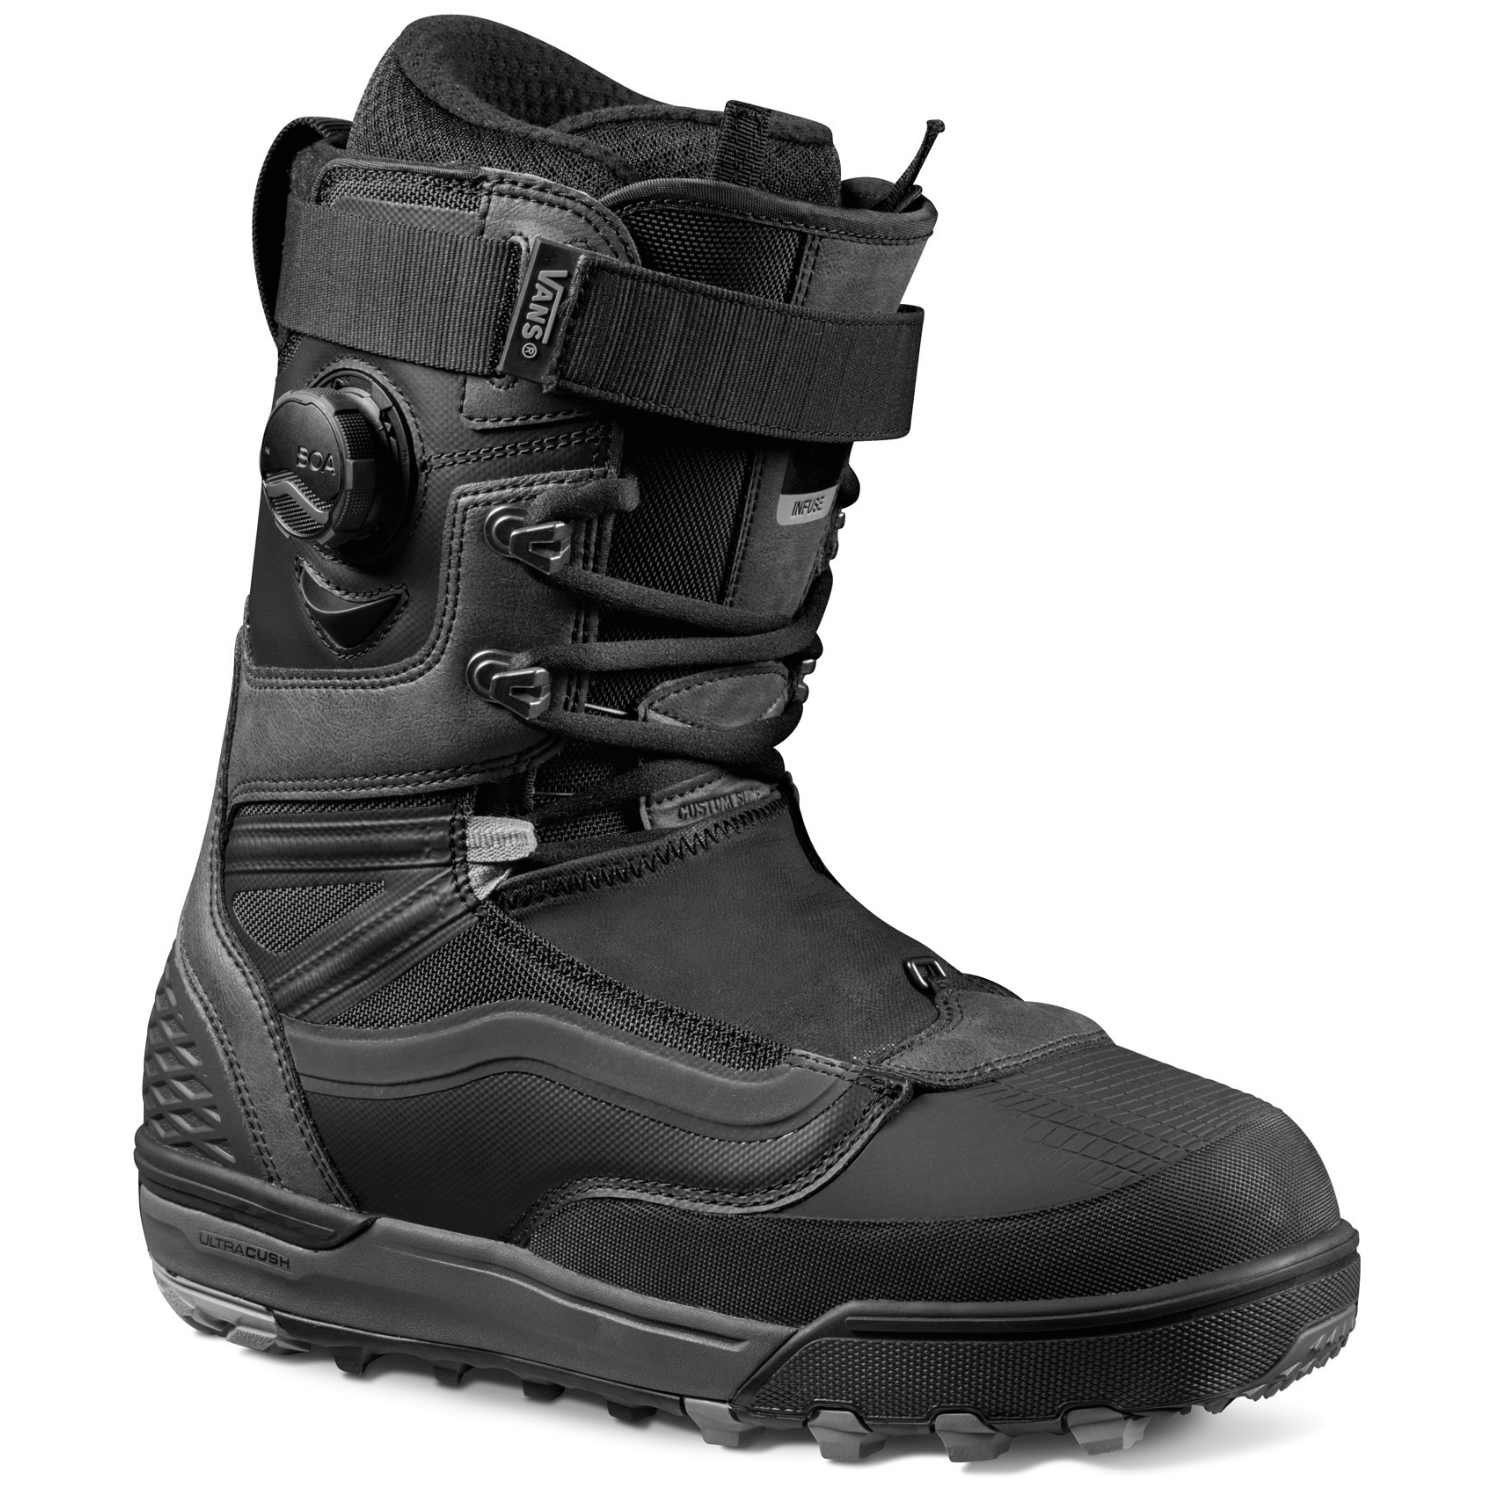 2023 Vans Infuse Snowboarding Boots For Sale